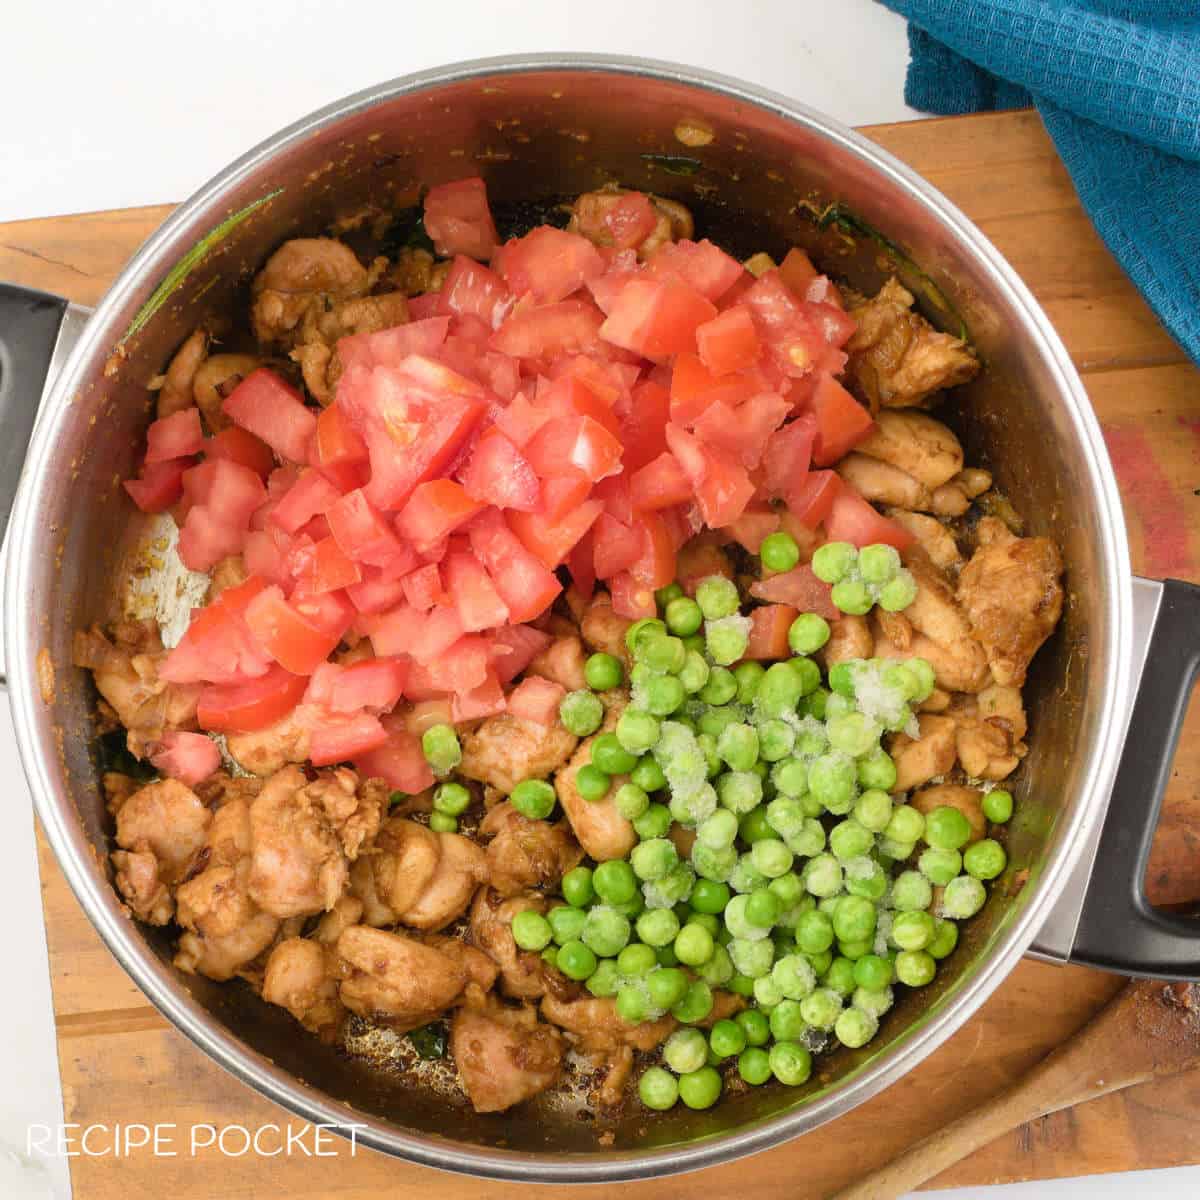 Cooked chicken, tomato and peas in a pot.